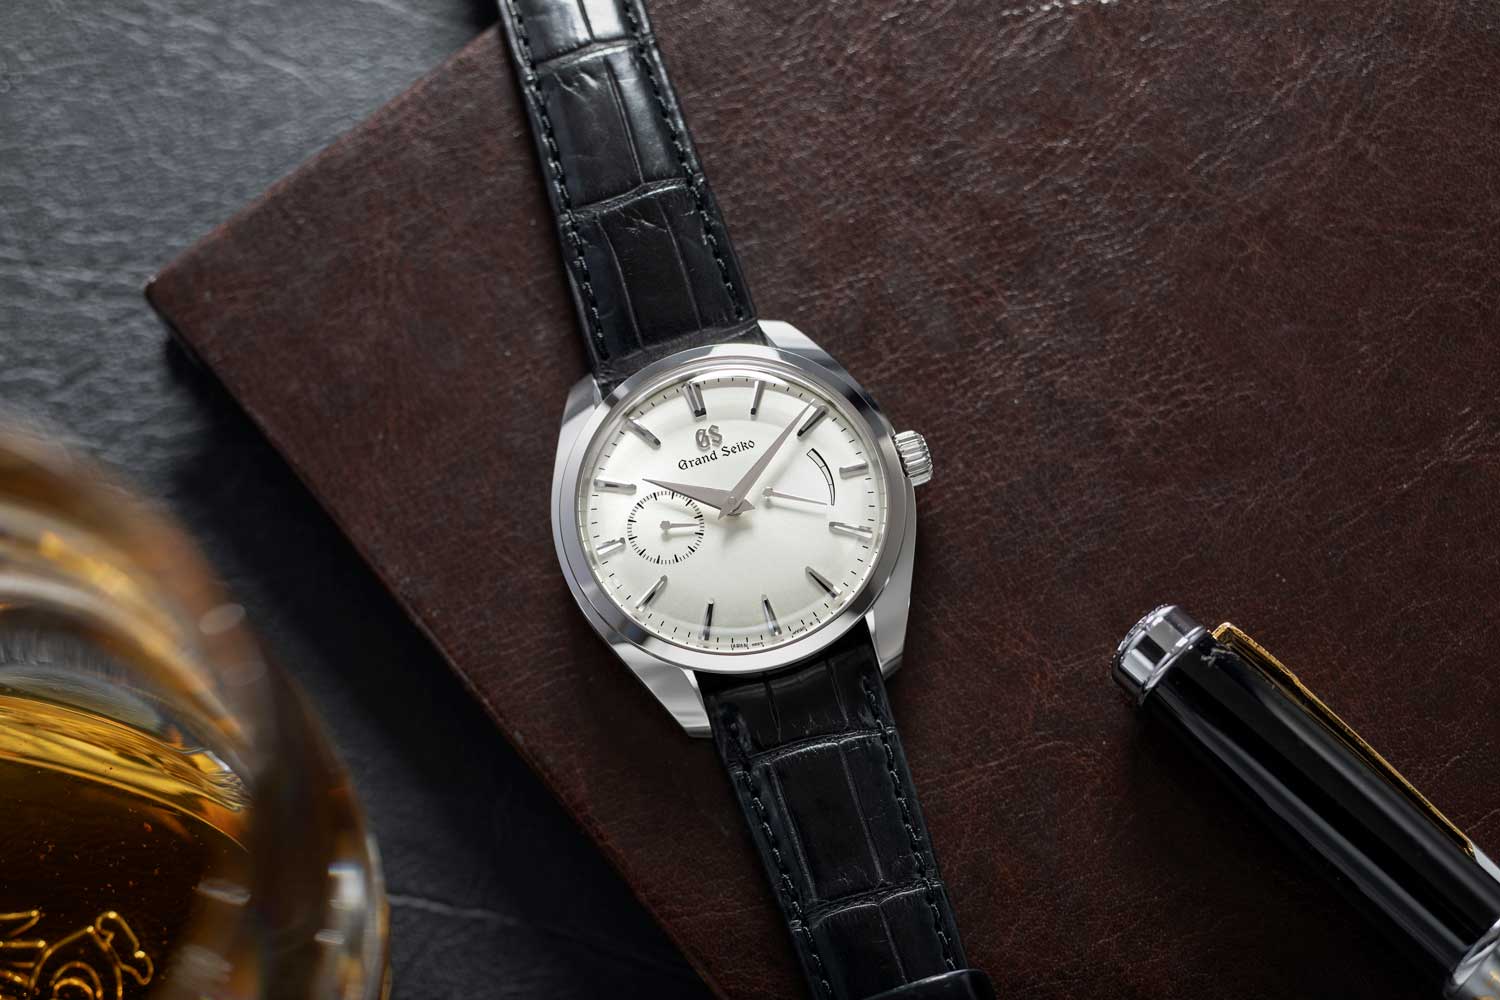 The manual wound Grand Seiko SBGK007G is yet another Zen Reductionist timepiece featuring hour, minute, small seconds and power reserve display (©Revolution)